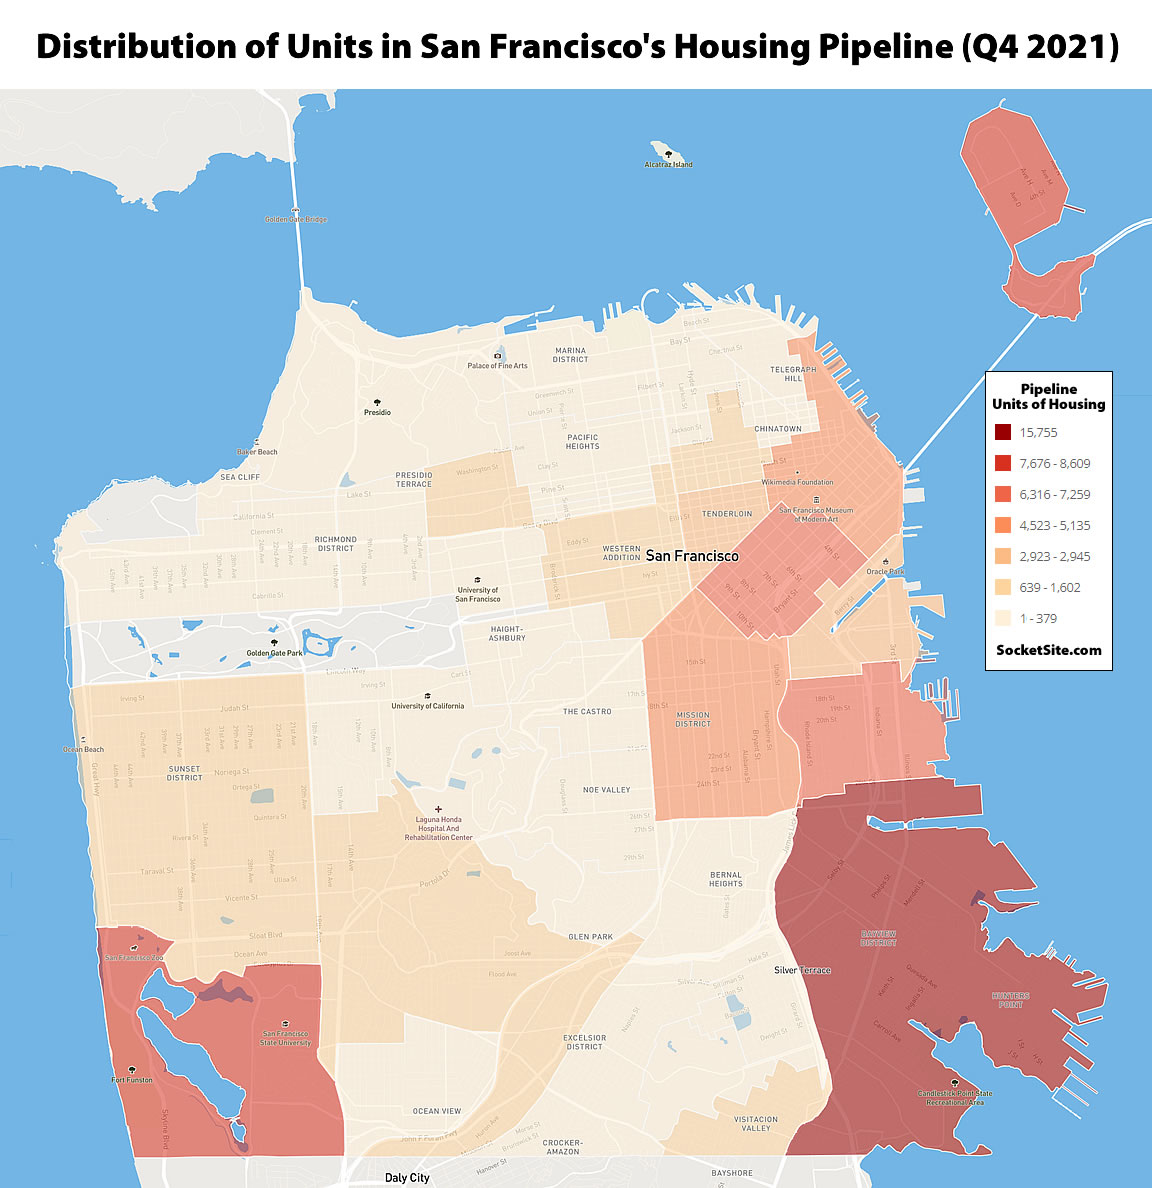 S.F.’s Housing Pipeline Back to Within 2 Percent of Peak, But…